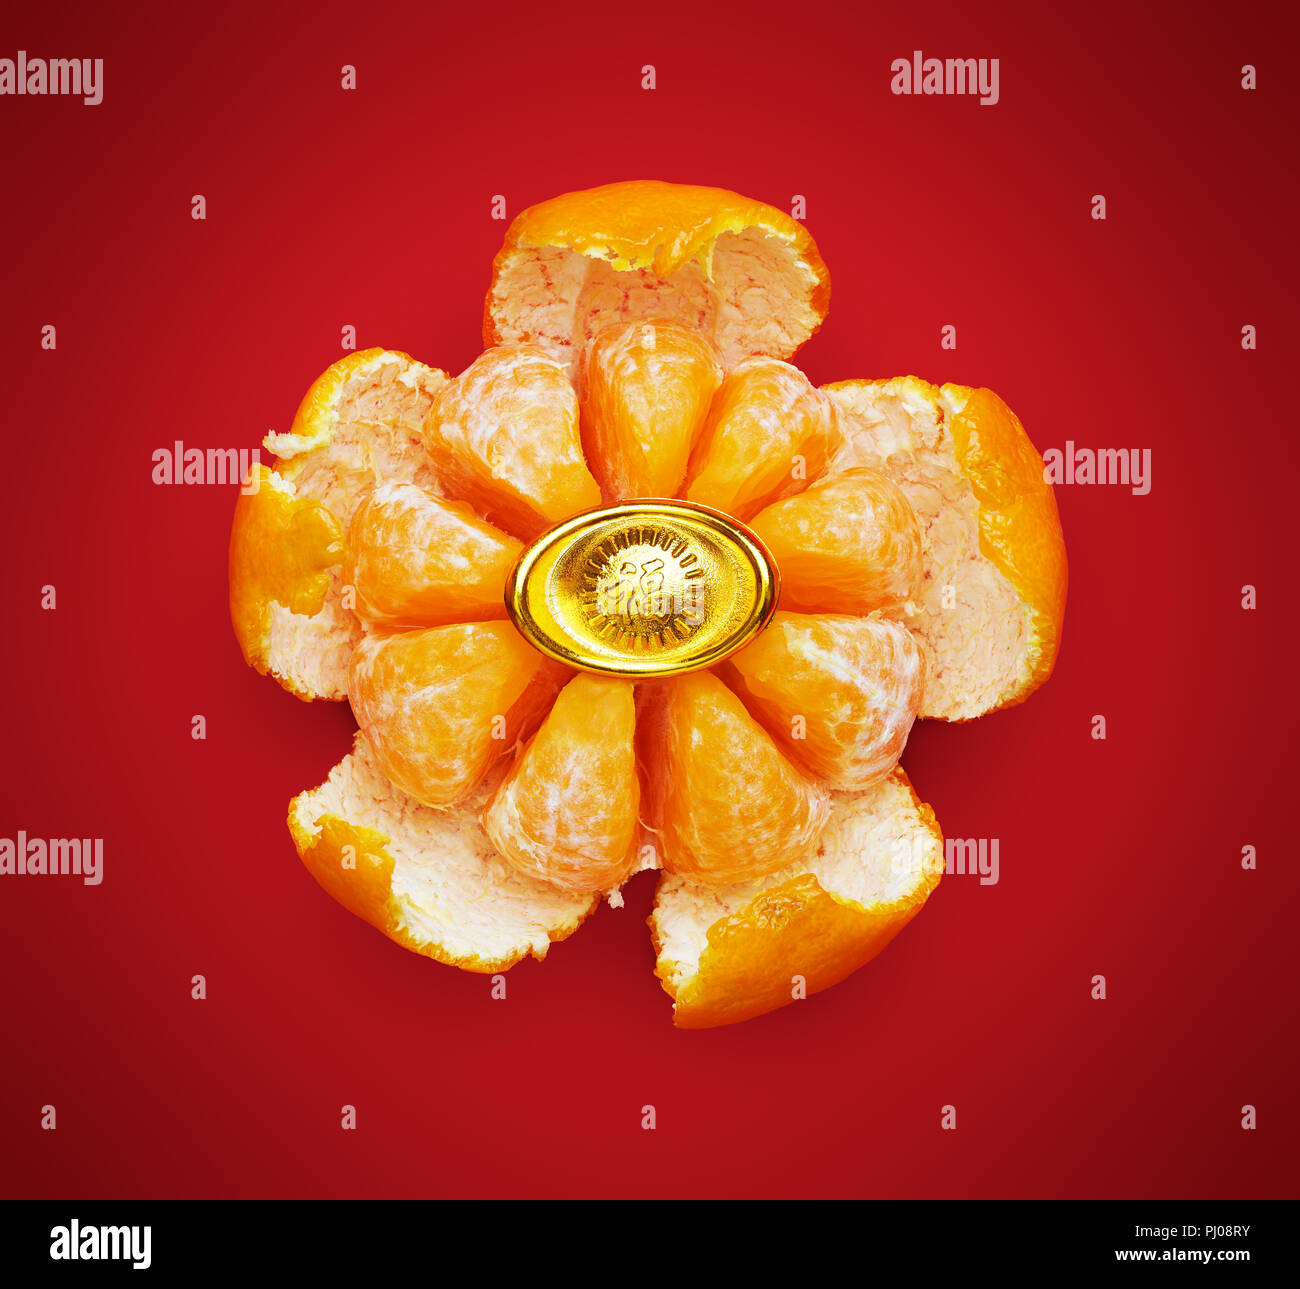 Mandarin orange peel into flower shape (chinese calligraphy means Prosperity), Clipping path included Stock Photo